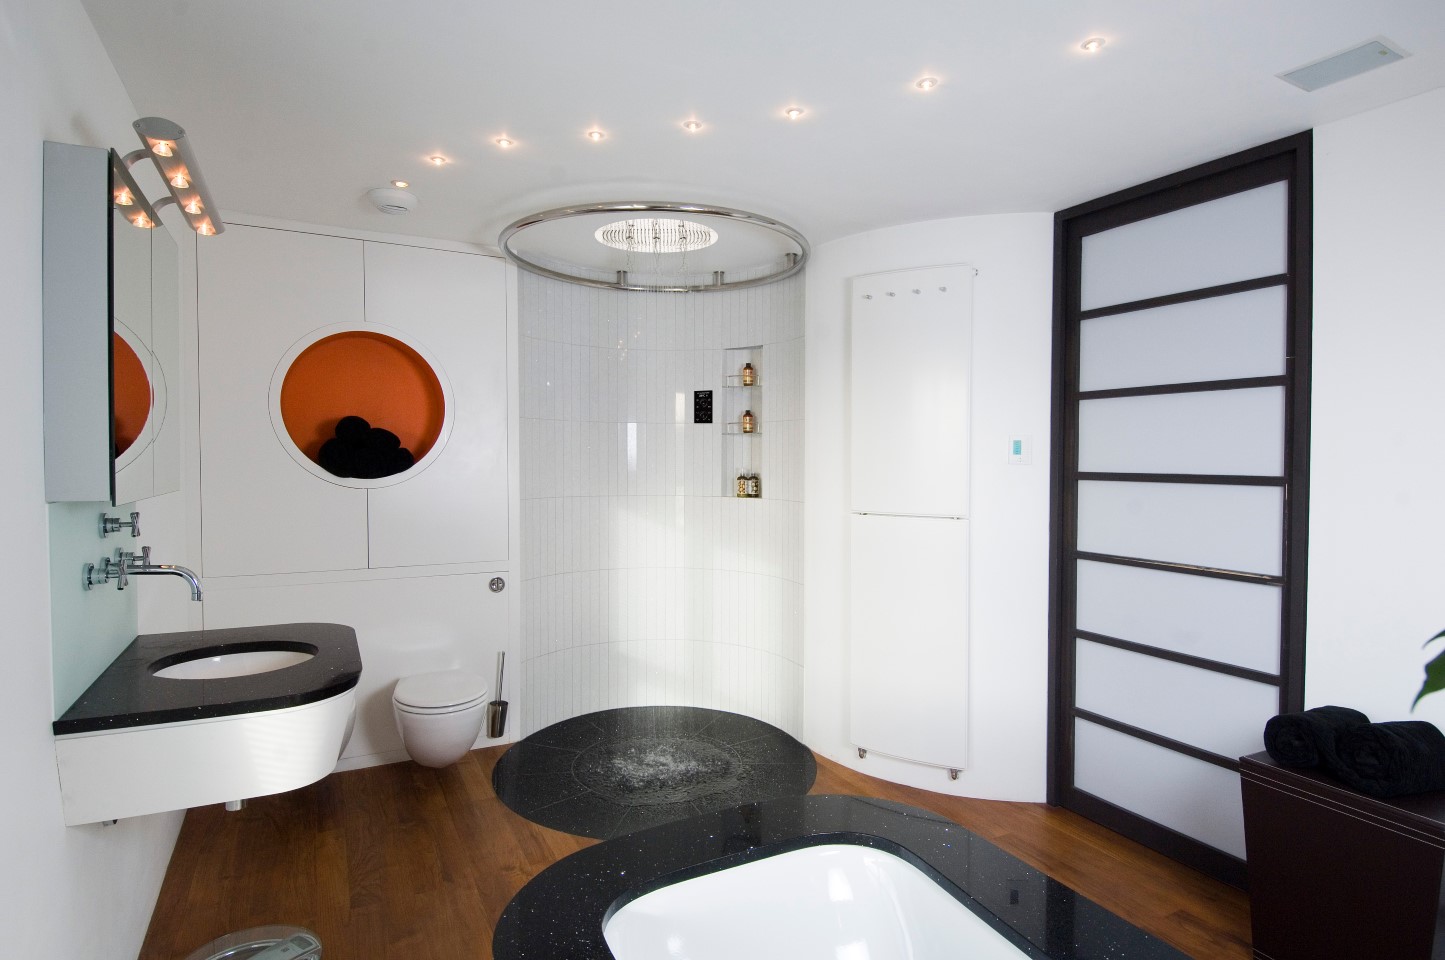 Bathroom Shower With Sophisticated Bathroom Shower Ideas With With Round Orange Niche And Black White Floating Sink Bathroom Shower Bathroom Ideas For Your Modern Home Design